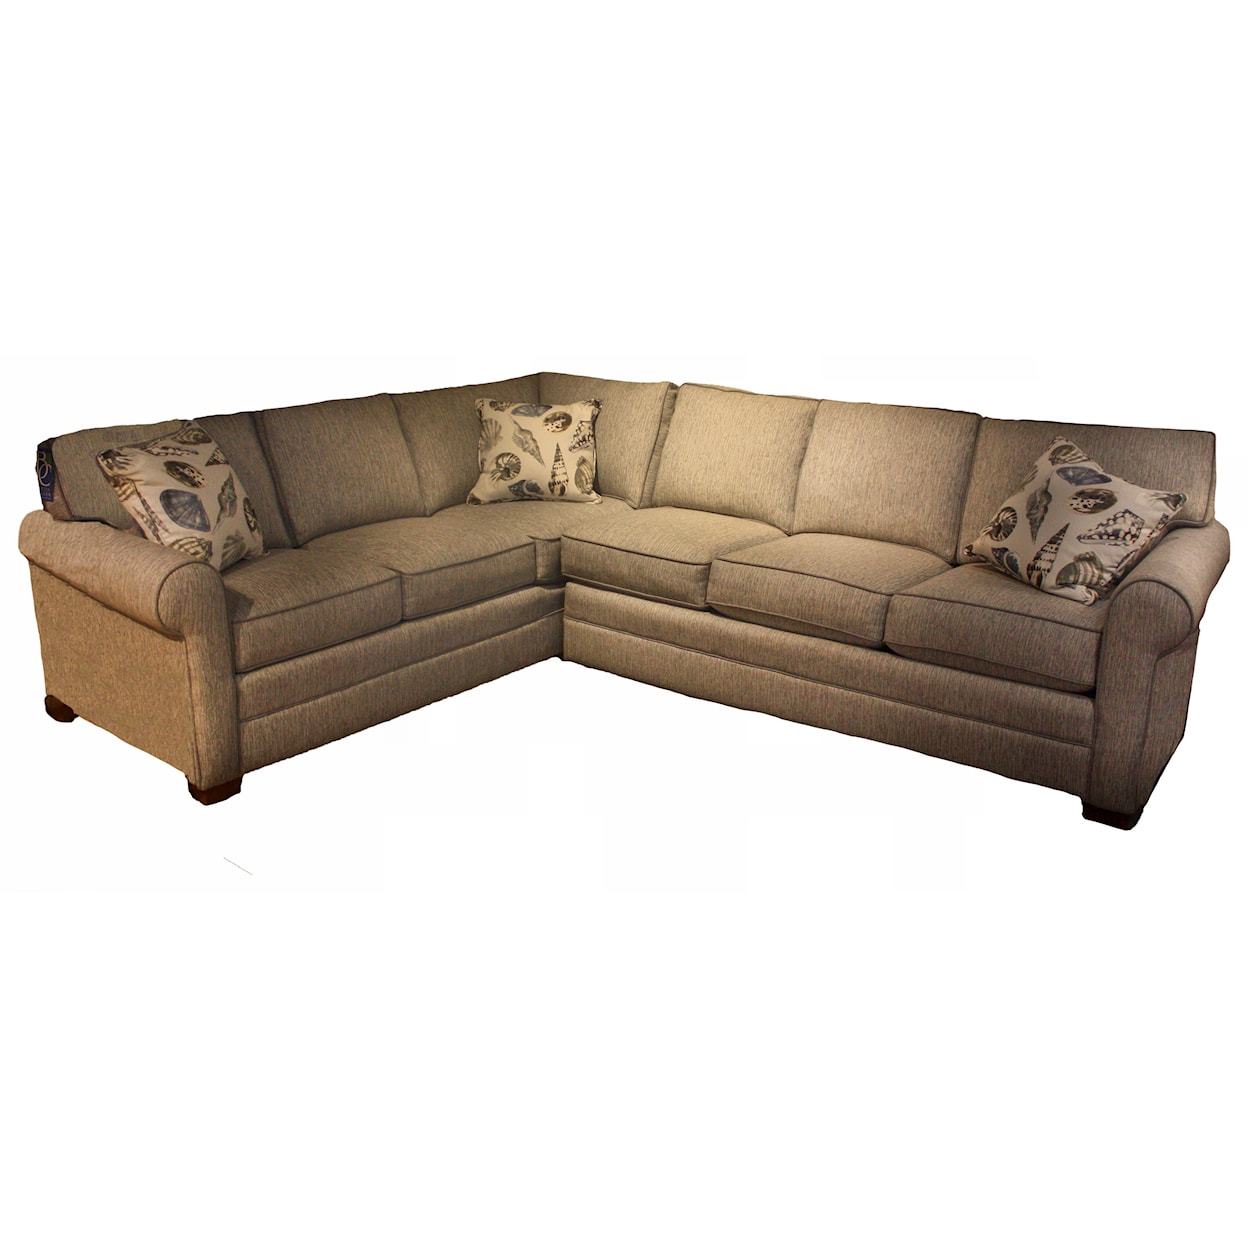 Braxton Culler Bedford 6 Seat Sectional